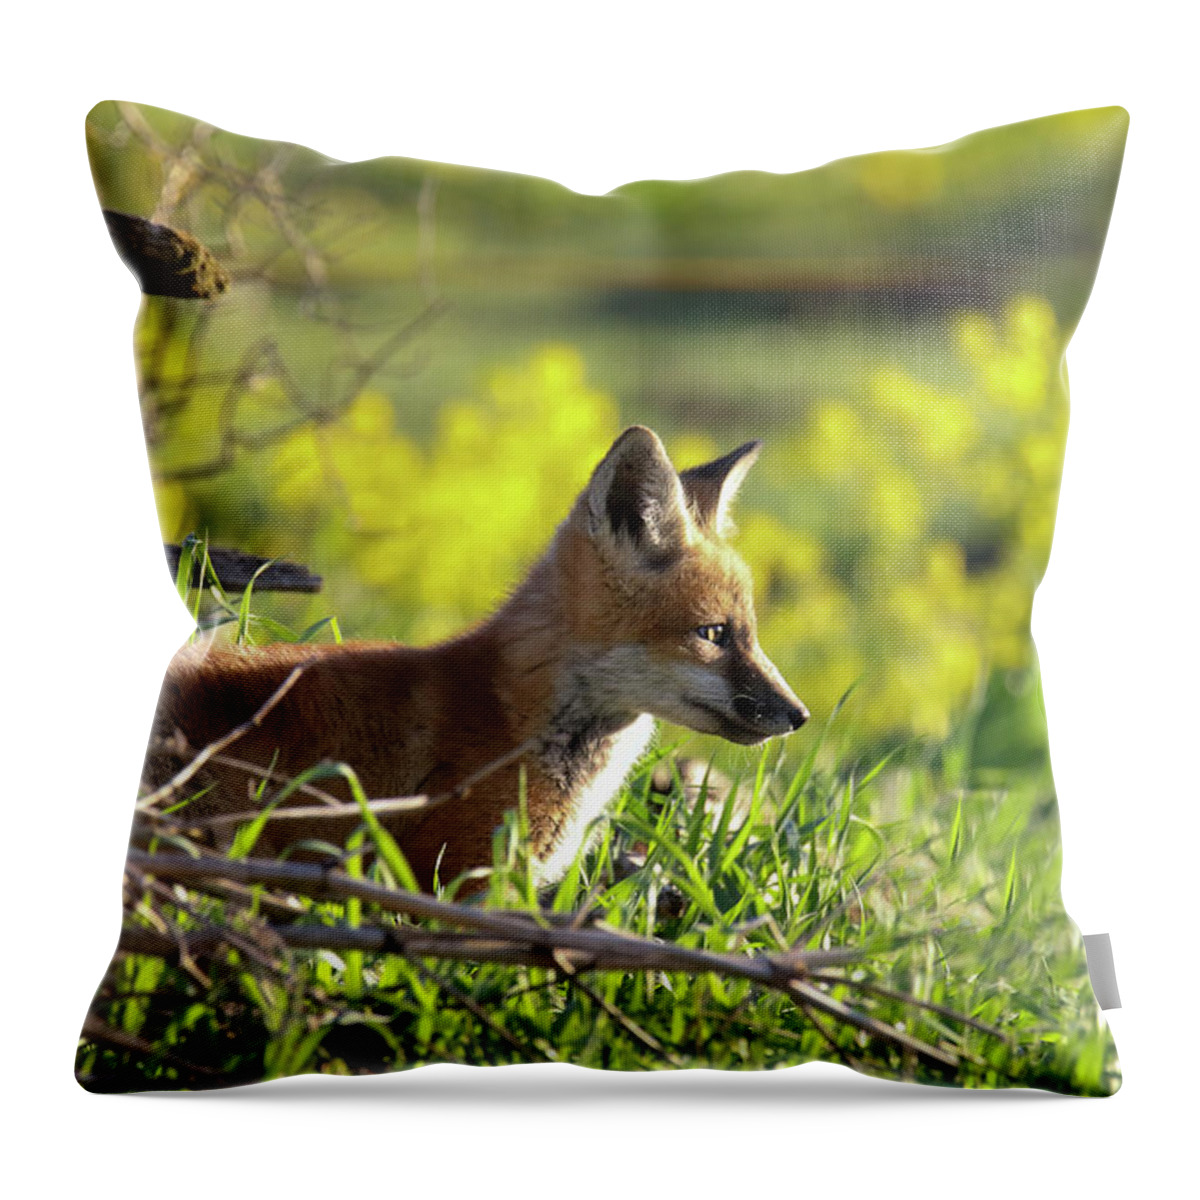 Redfox Throw Pillow featuring the photograph Fox at Den by Brook Burling